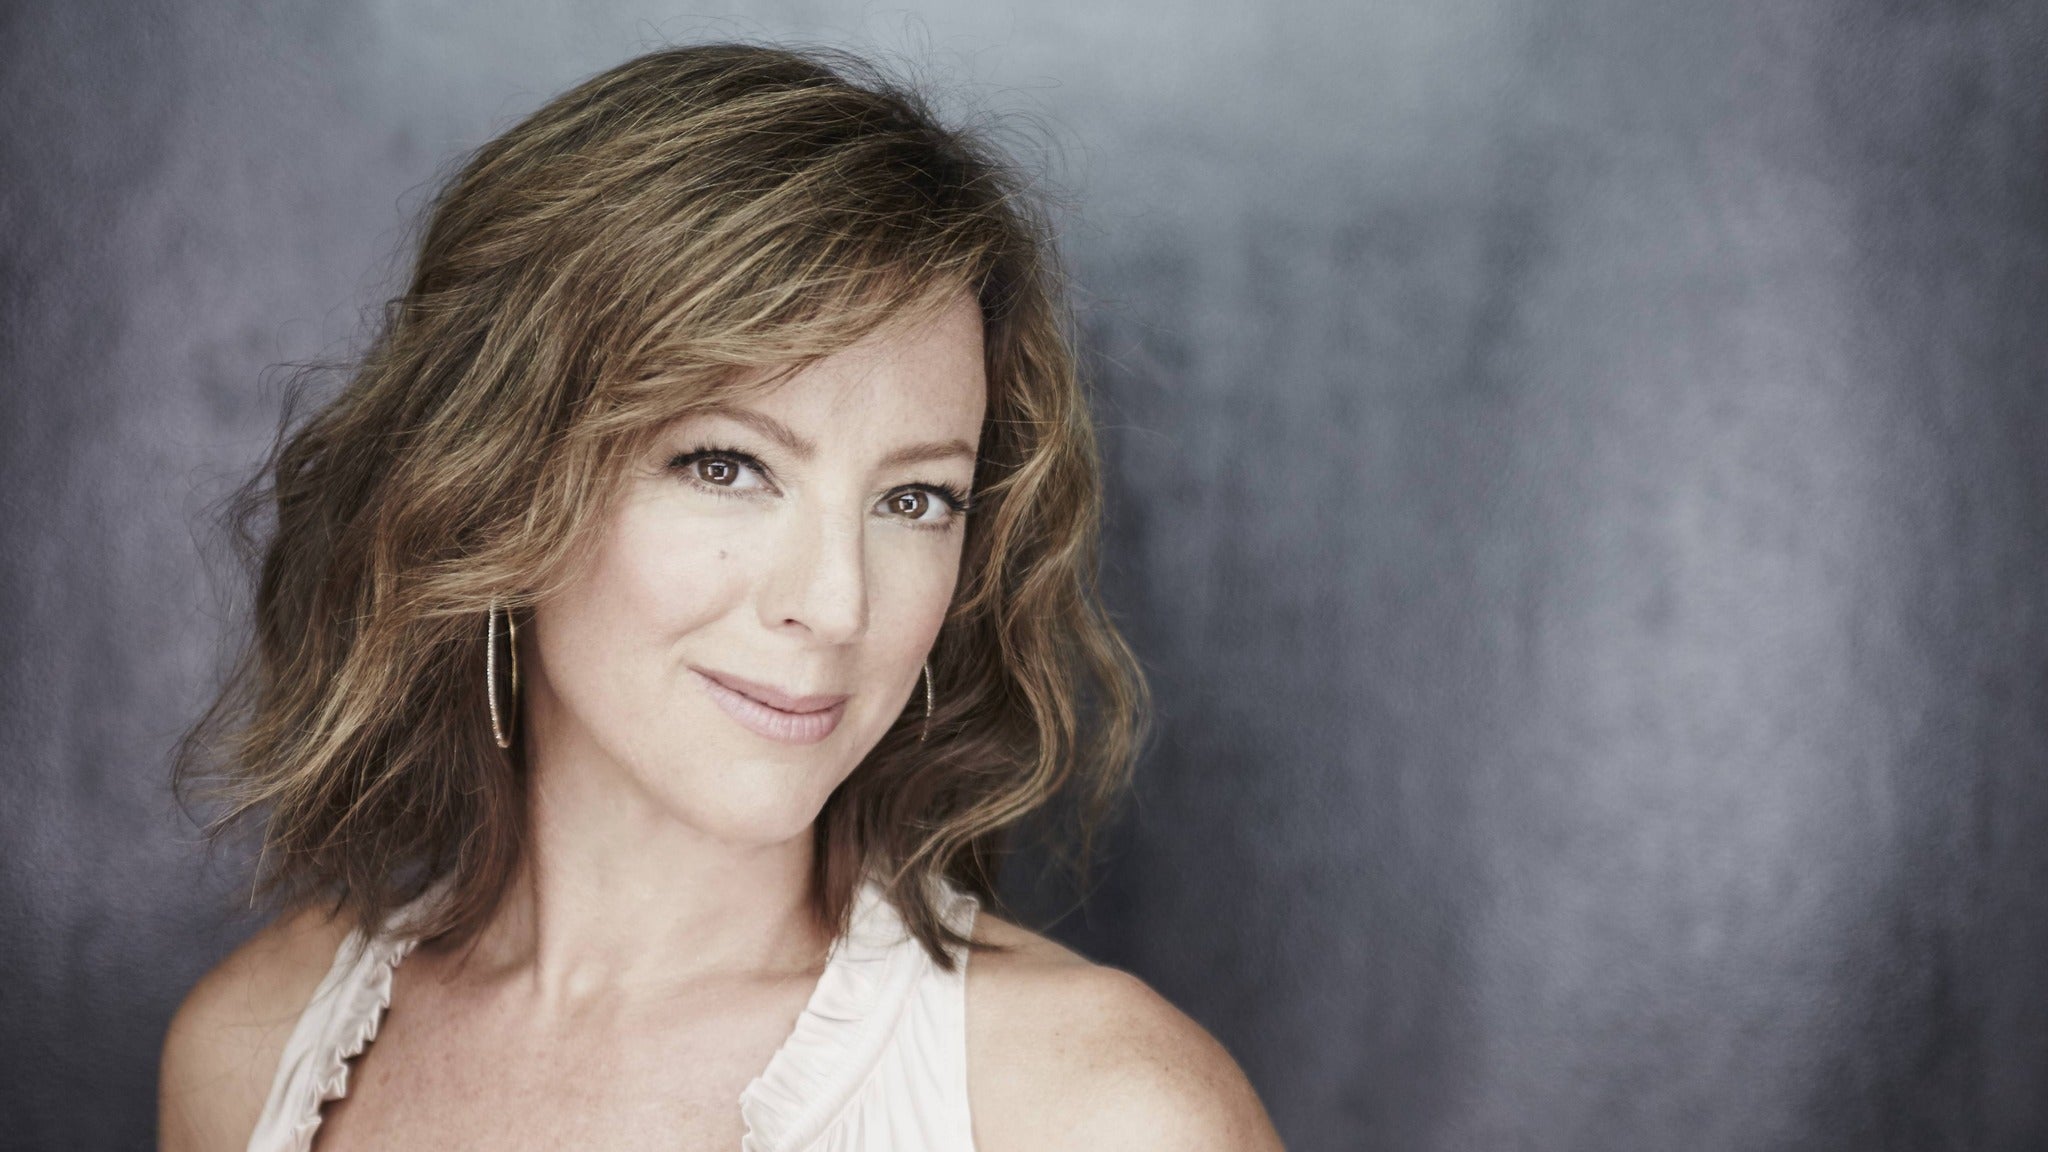 Image used with permission from Ticketmaster | Sarah McLachlan tickets